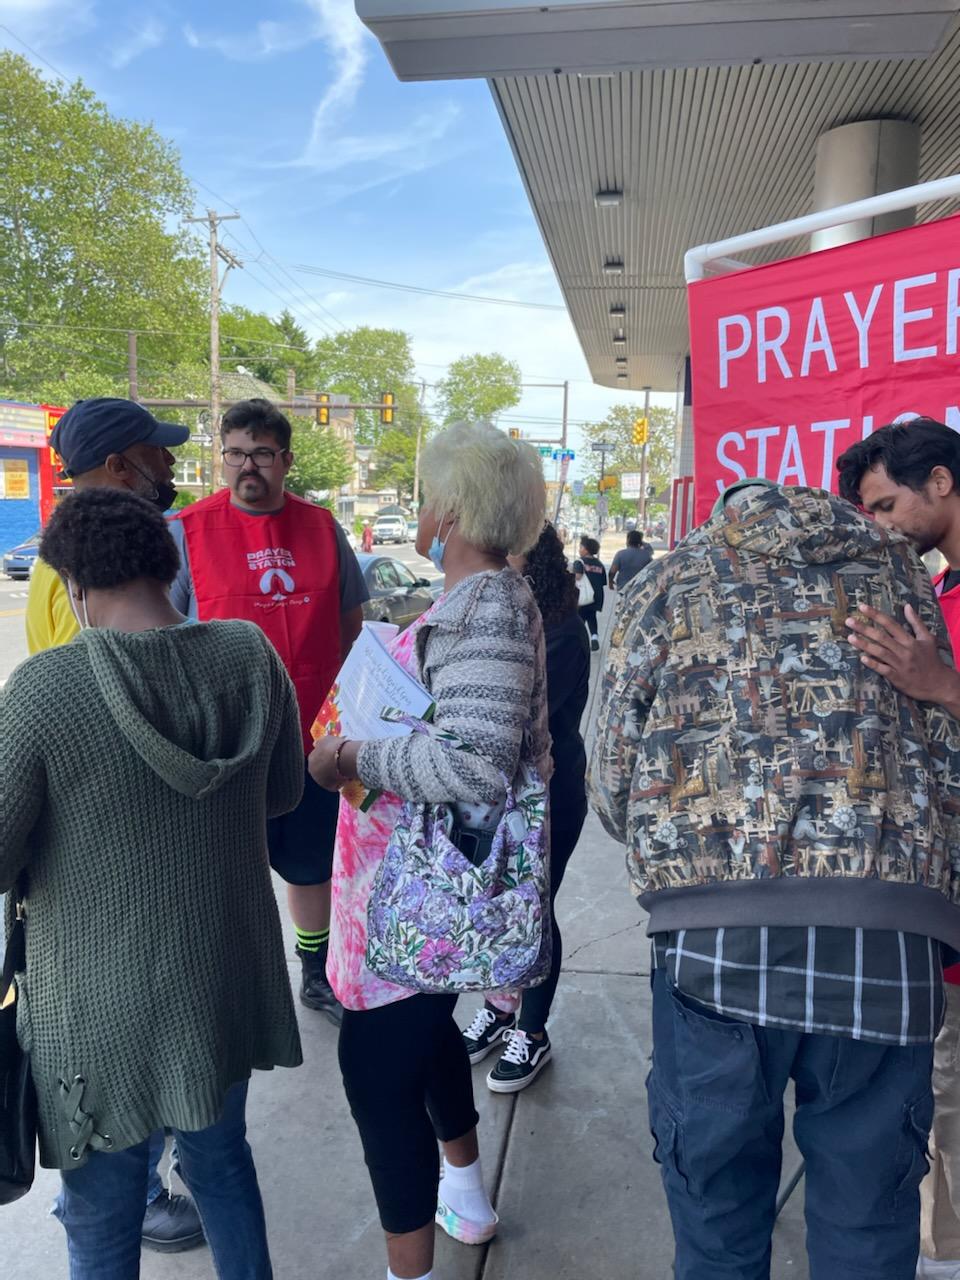 Prayer Stations in Philly... Prayer Changes Things!